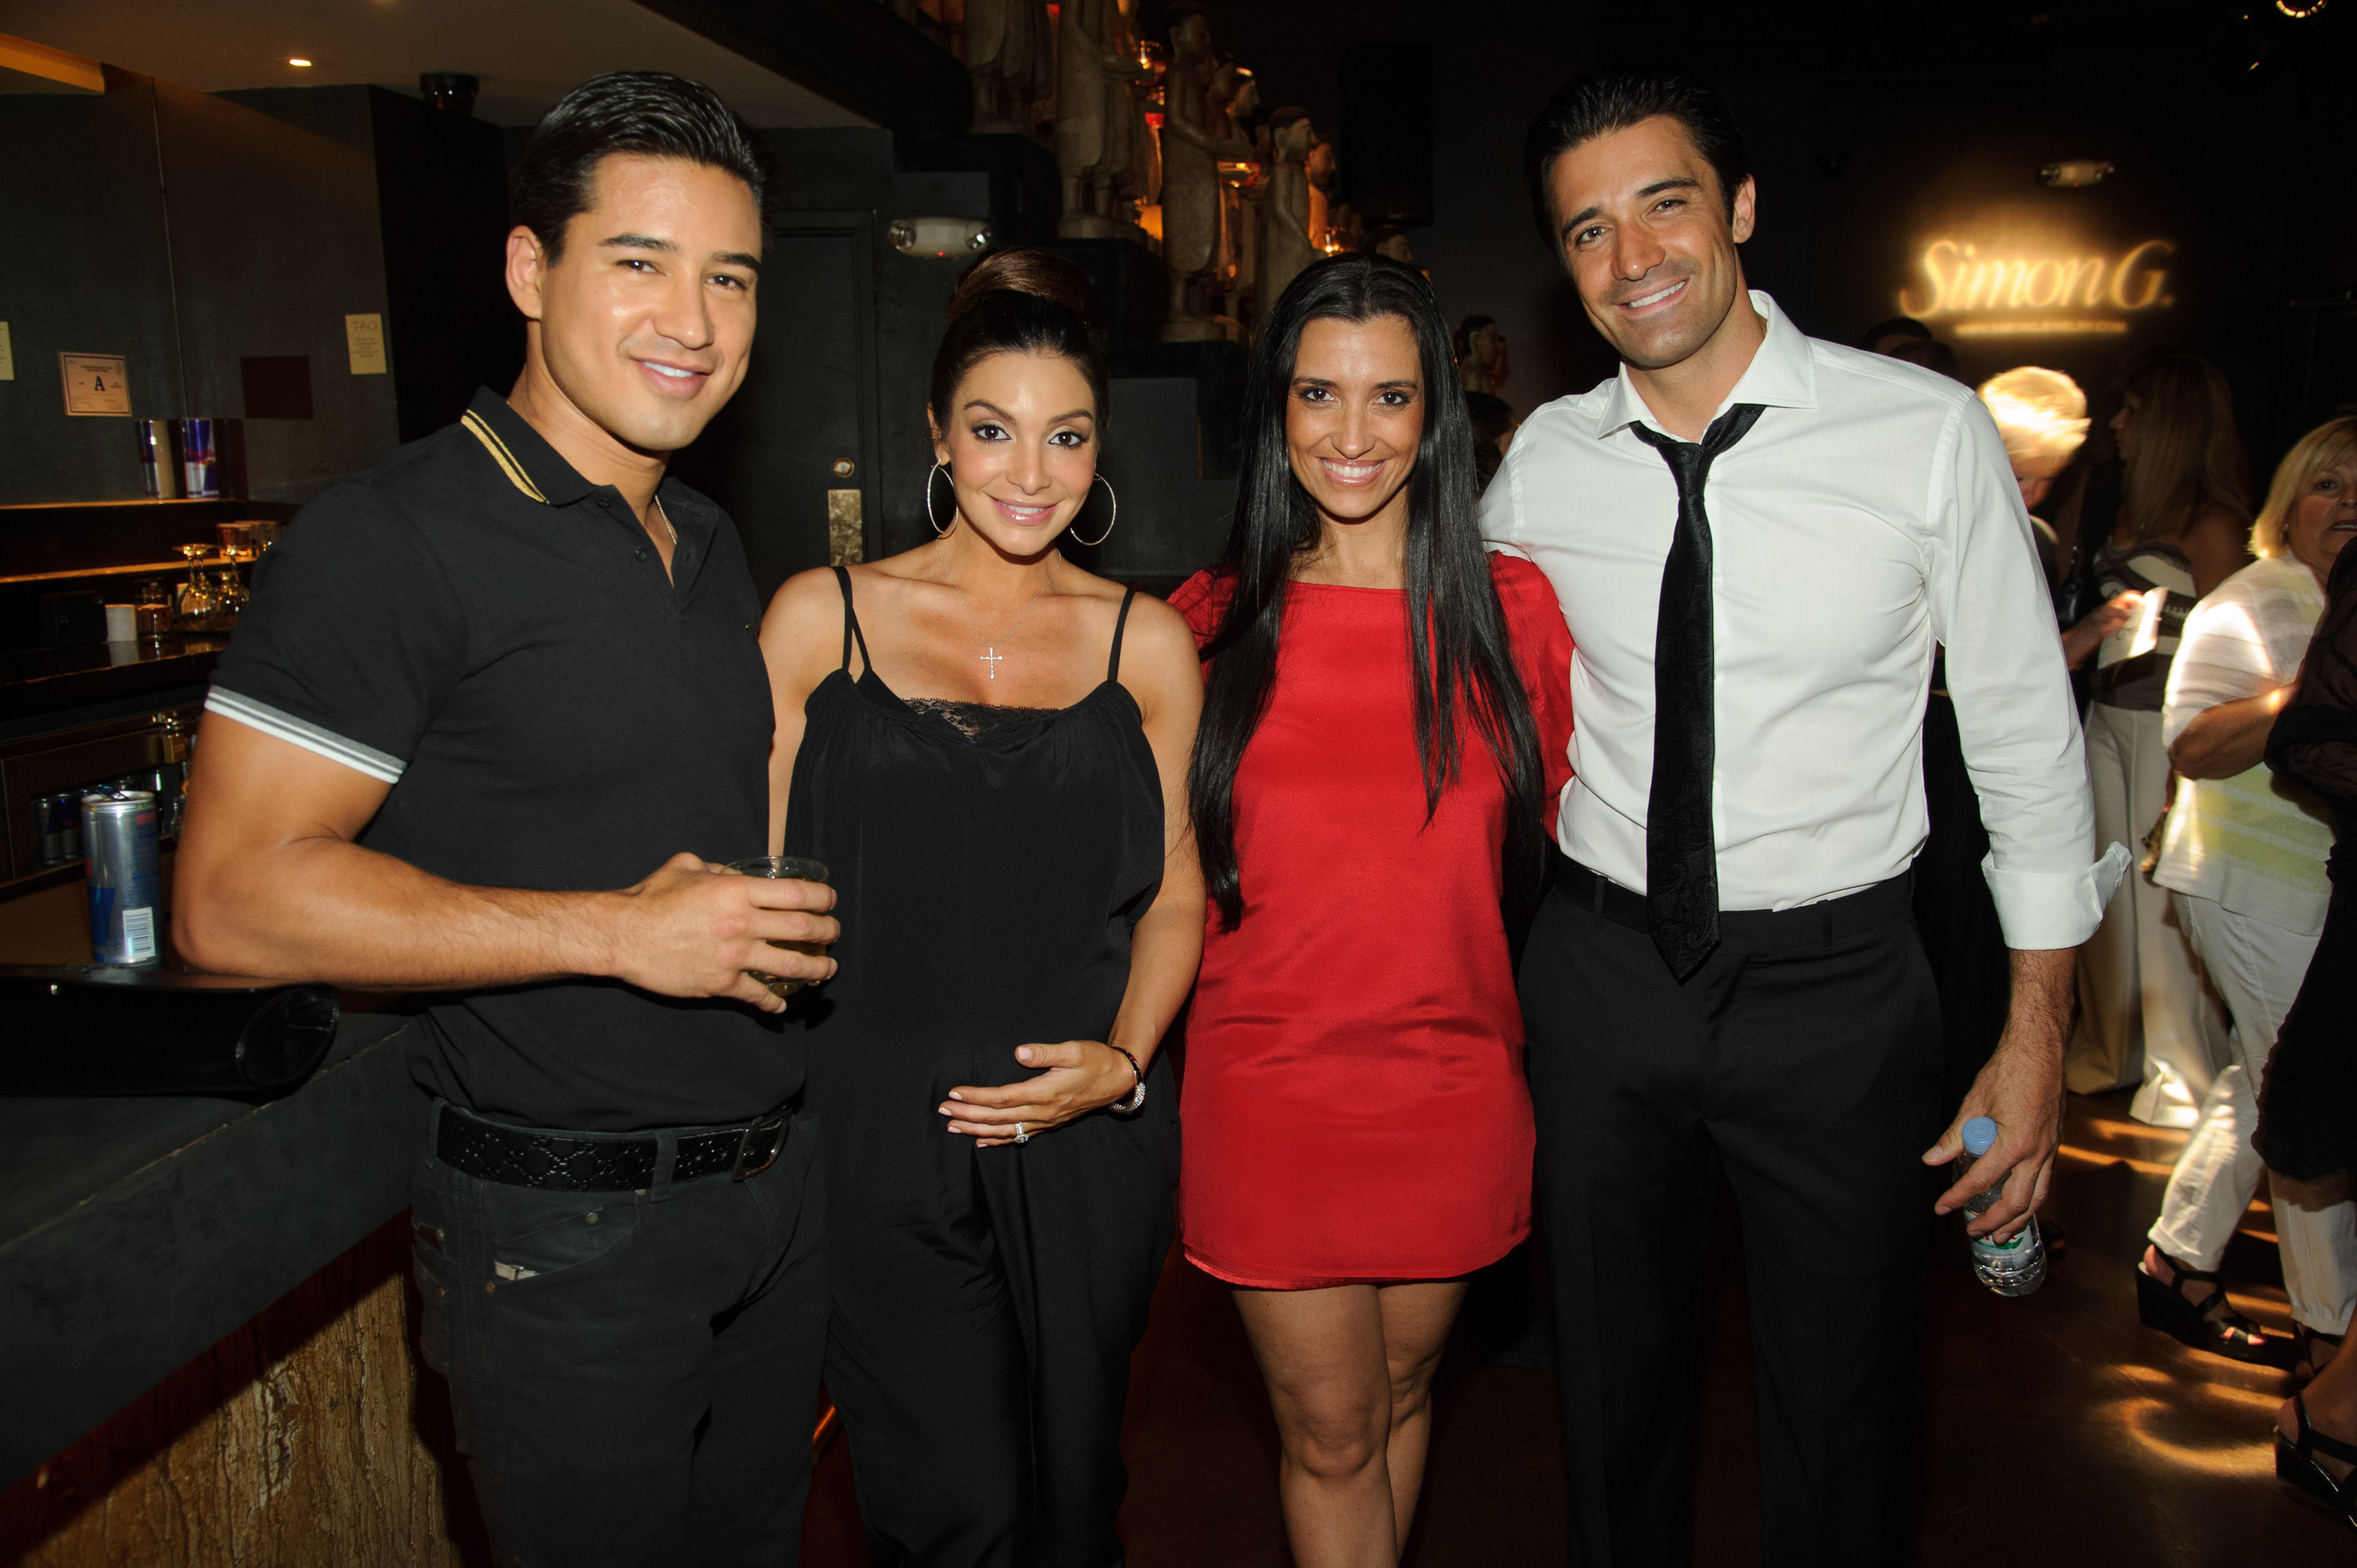 Mario & Courtney Lopez and Gilles & Carole Marini - photo by Al Powers/PowersImagery